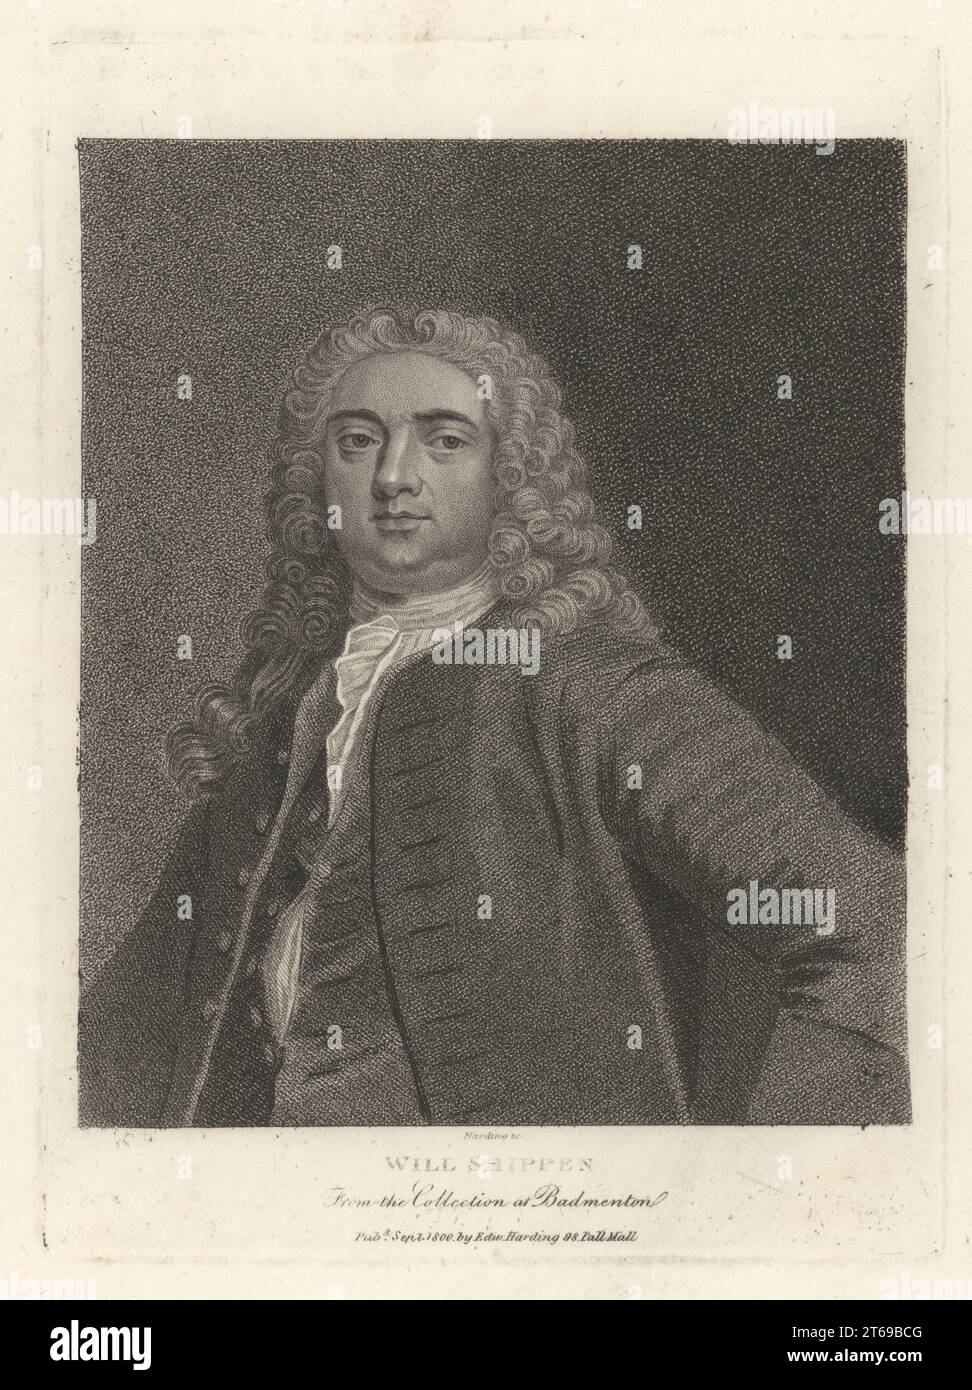 William Shippen, English Jacobite, poet and writer, Tory politician who sat in the House of Commons, 1673-1743. From the collection at Badmenton. Copperplate engraving by Edward Harding from John Adolphus The British Cabinet, containing Portraits of Illustrious Personages, printed by T. Bensley for E. Harding, 98 Pall Mall, London, 1800. Stock Photo